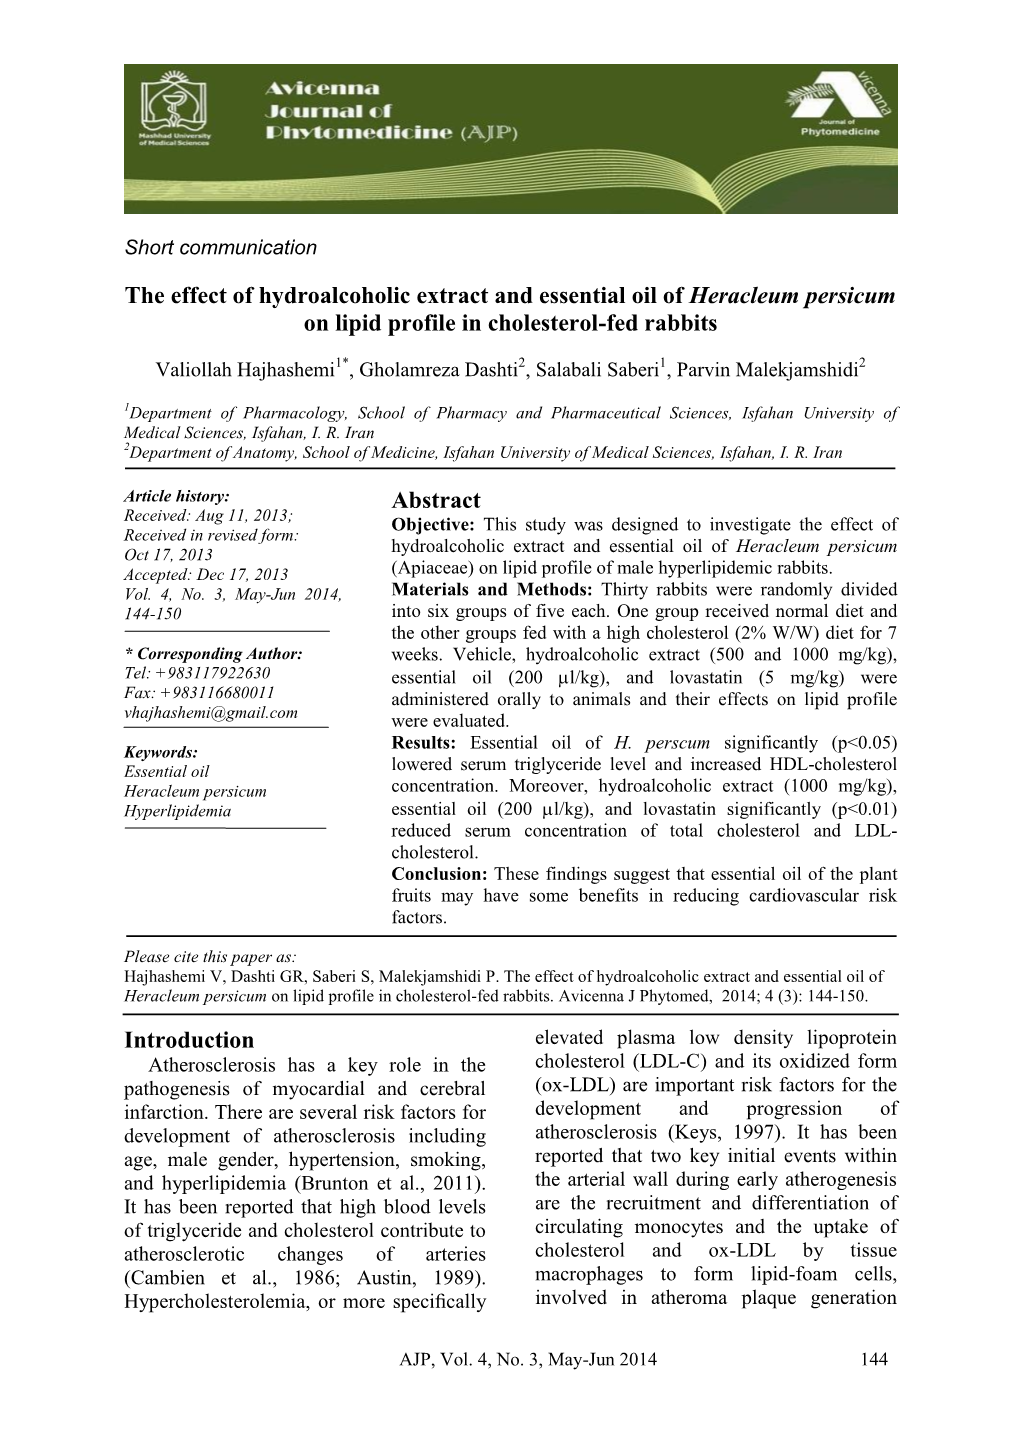 The Effect of Hydroalcoholic Extract and Essential Oil of Heracleum Persicum on Lipid Profile in Cholesterol-Fed Rabbits